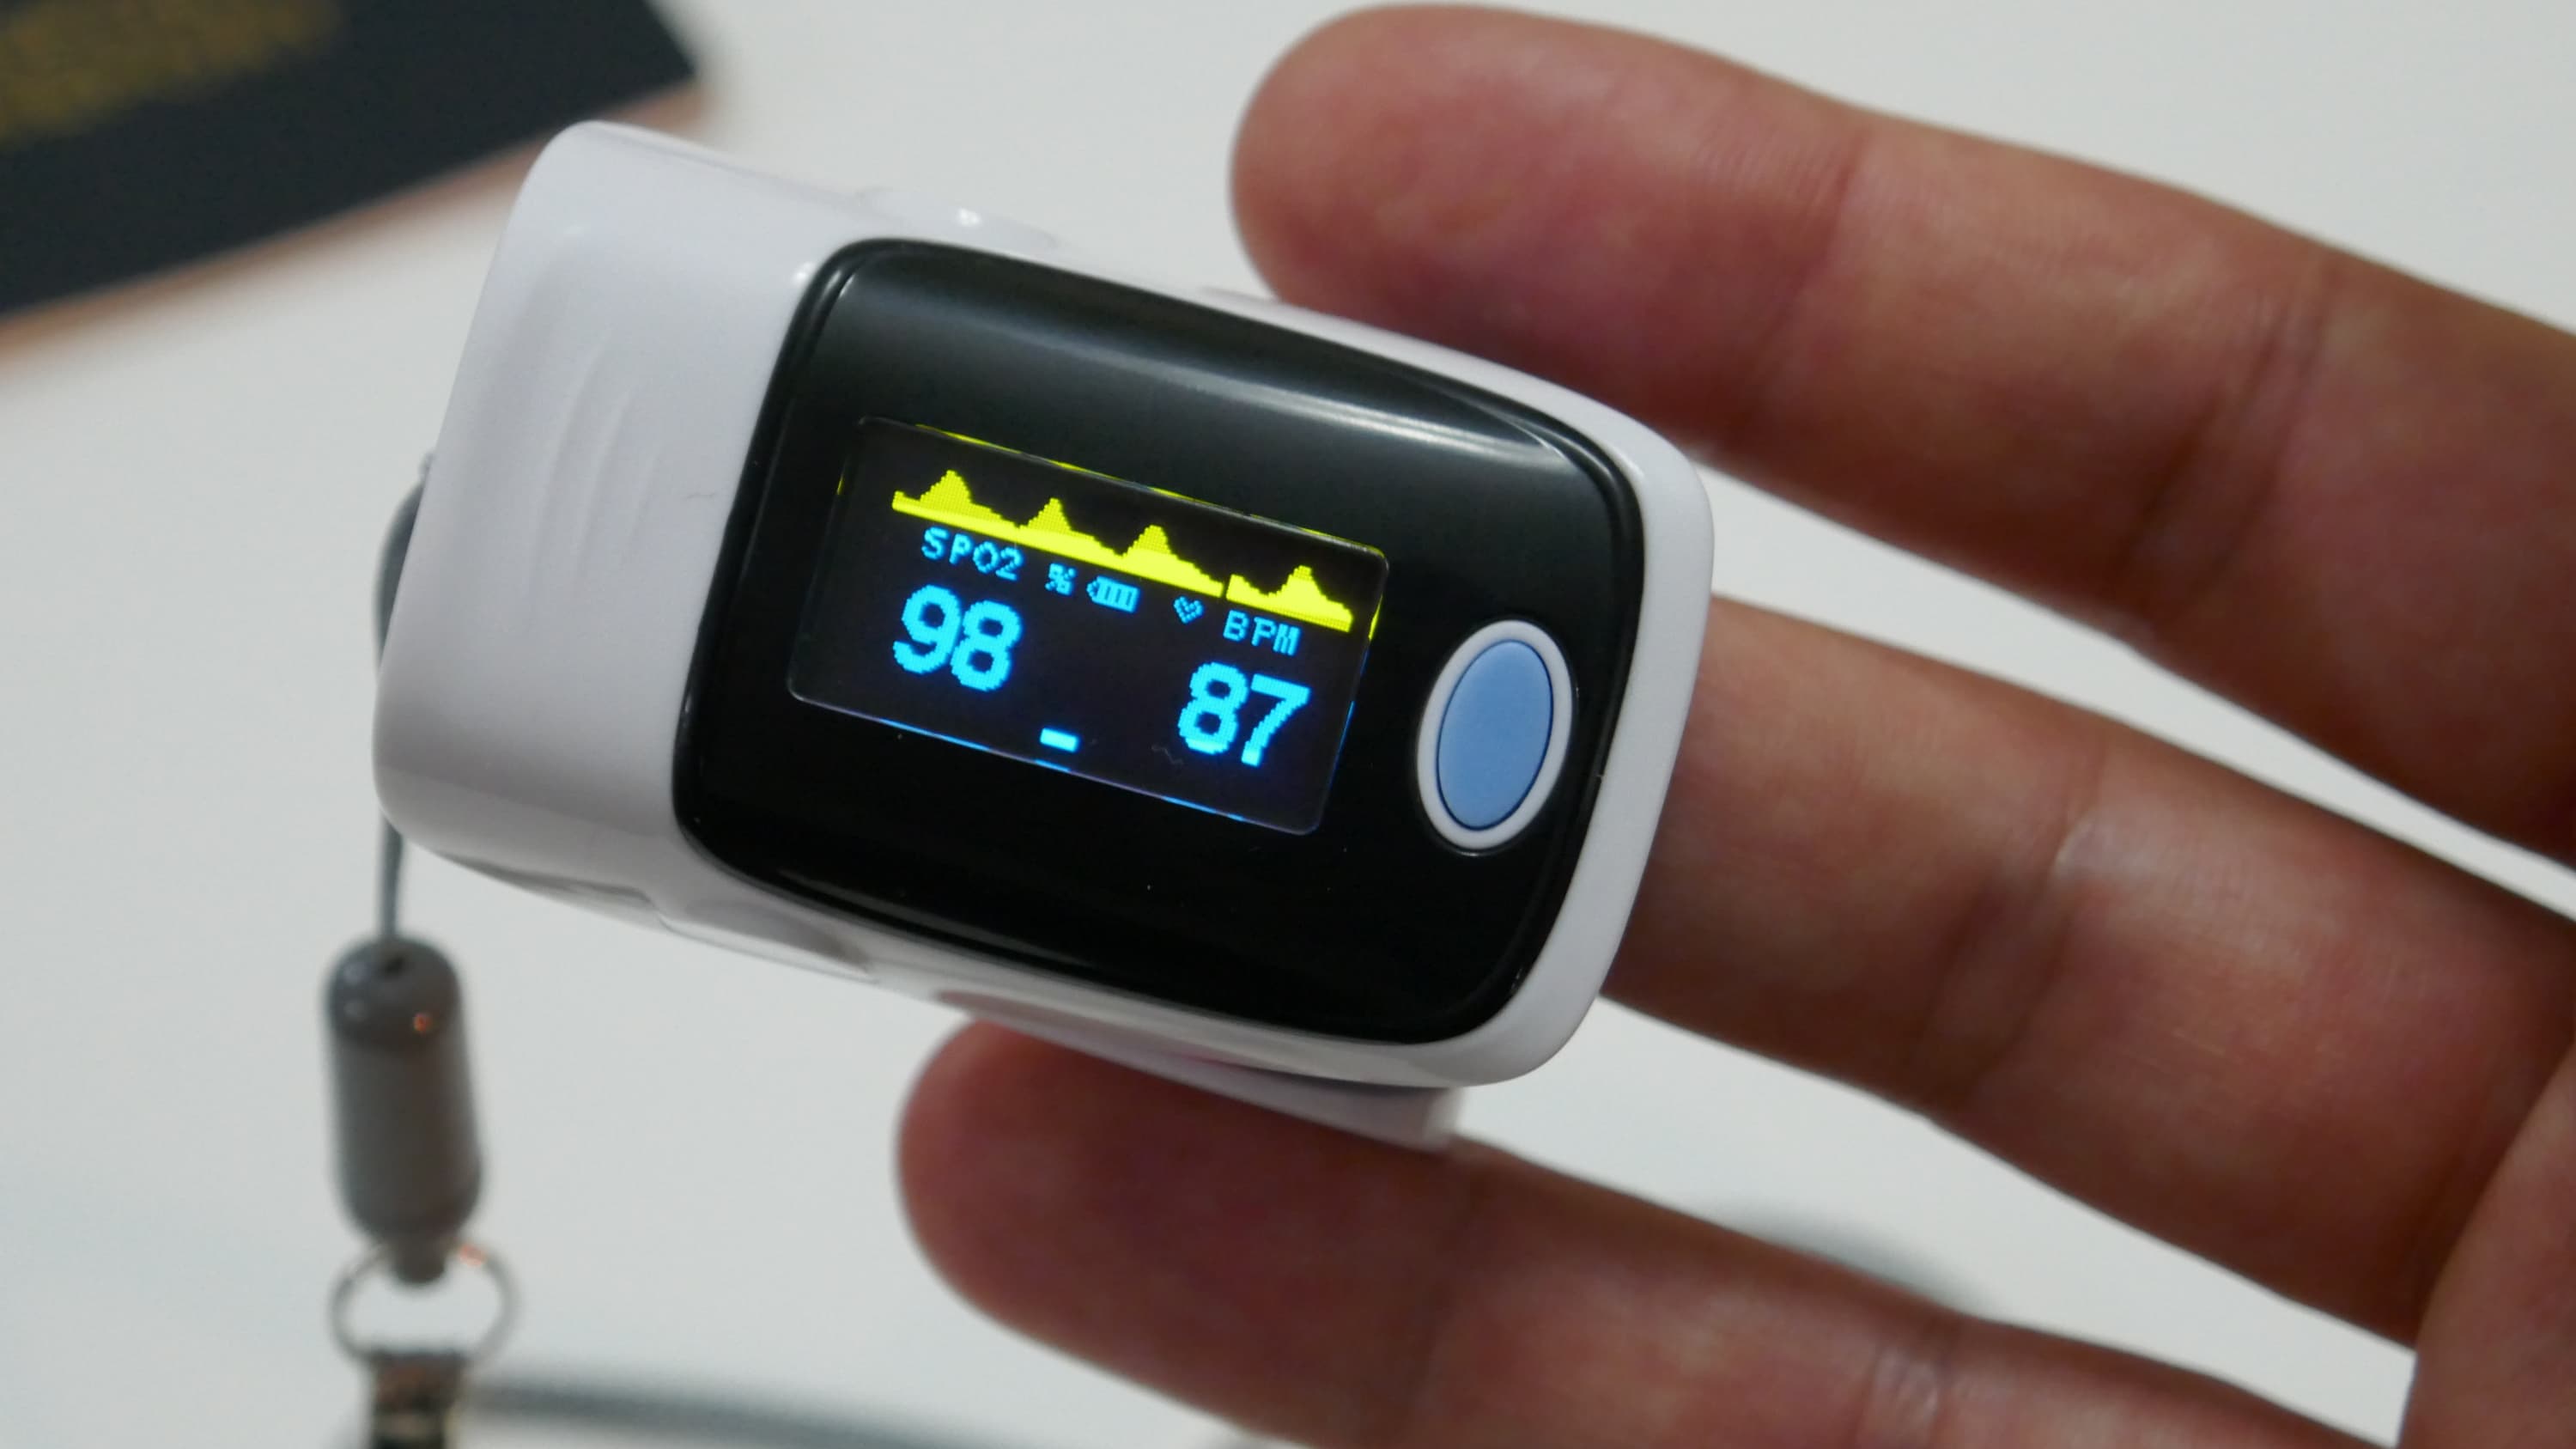 pulse oximeter, sometimes used to monitor COVID-19 symptoms